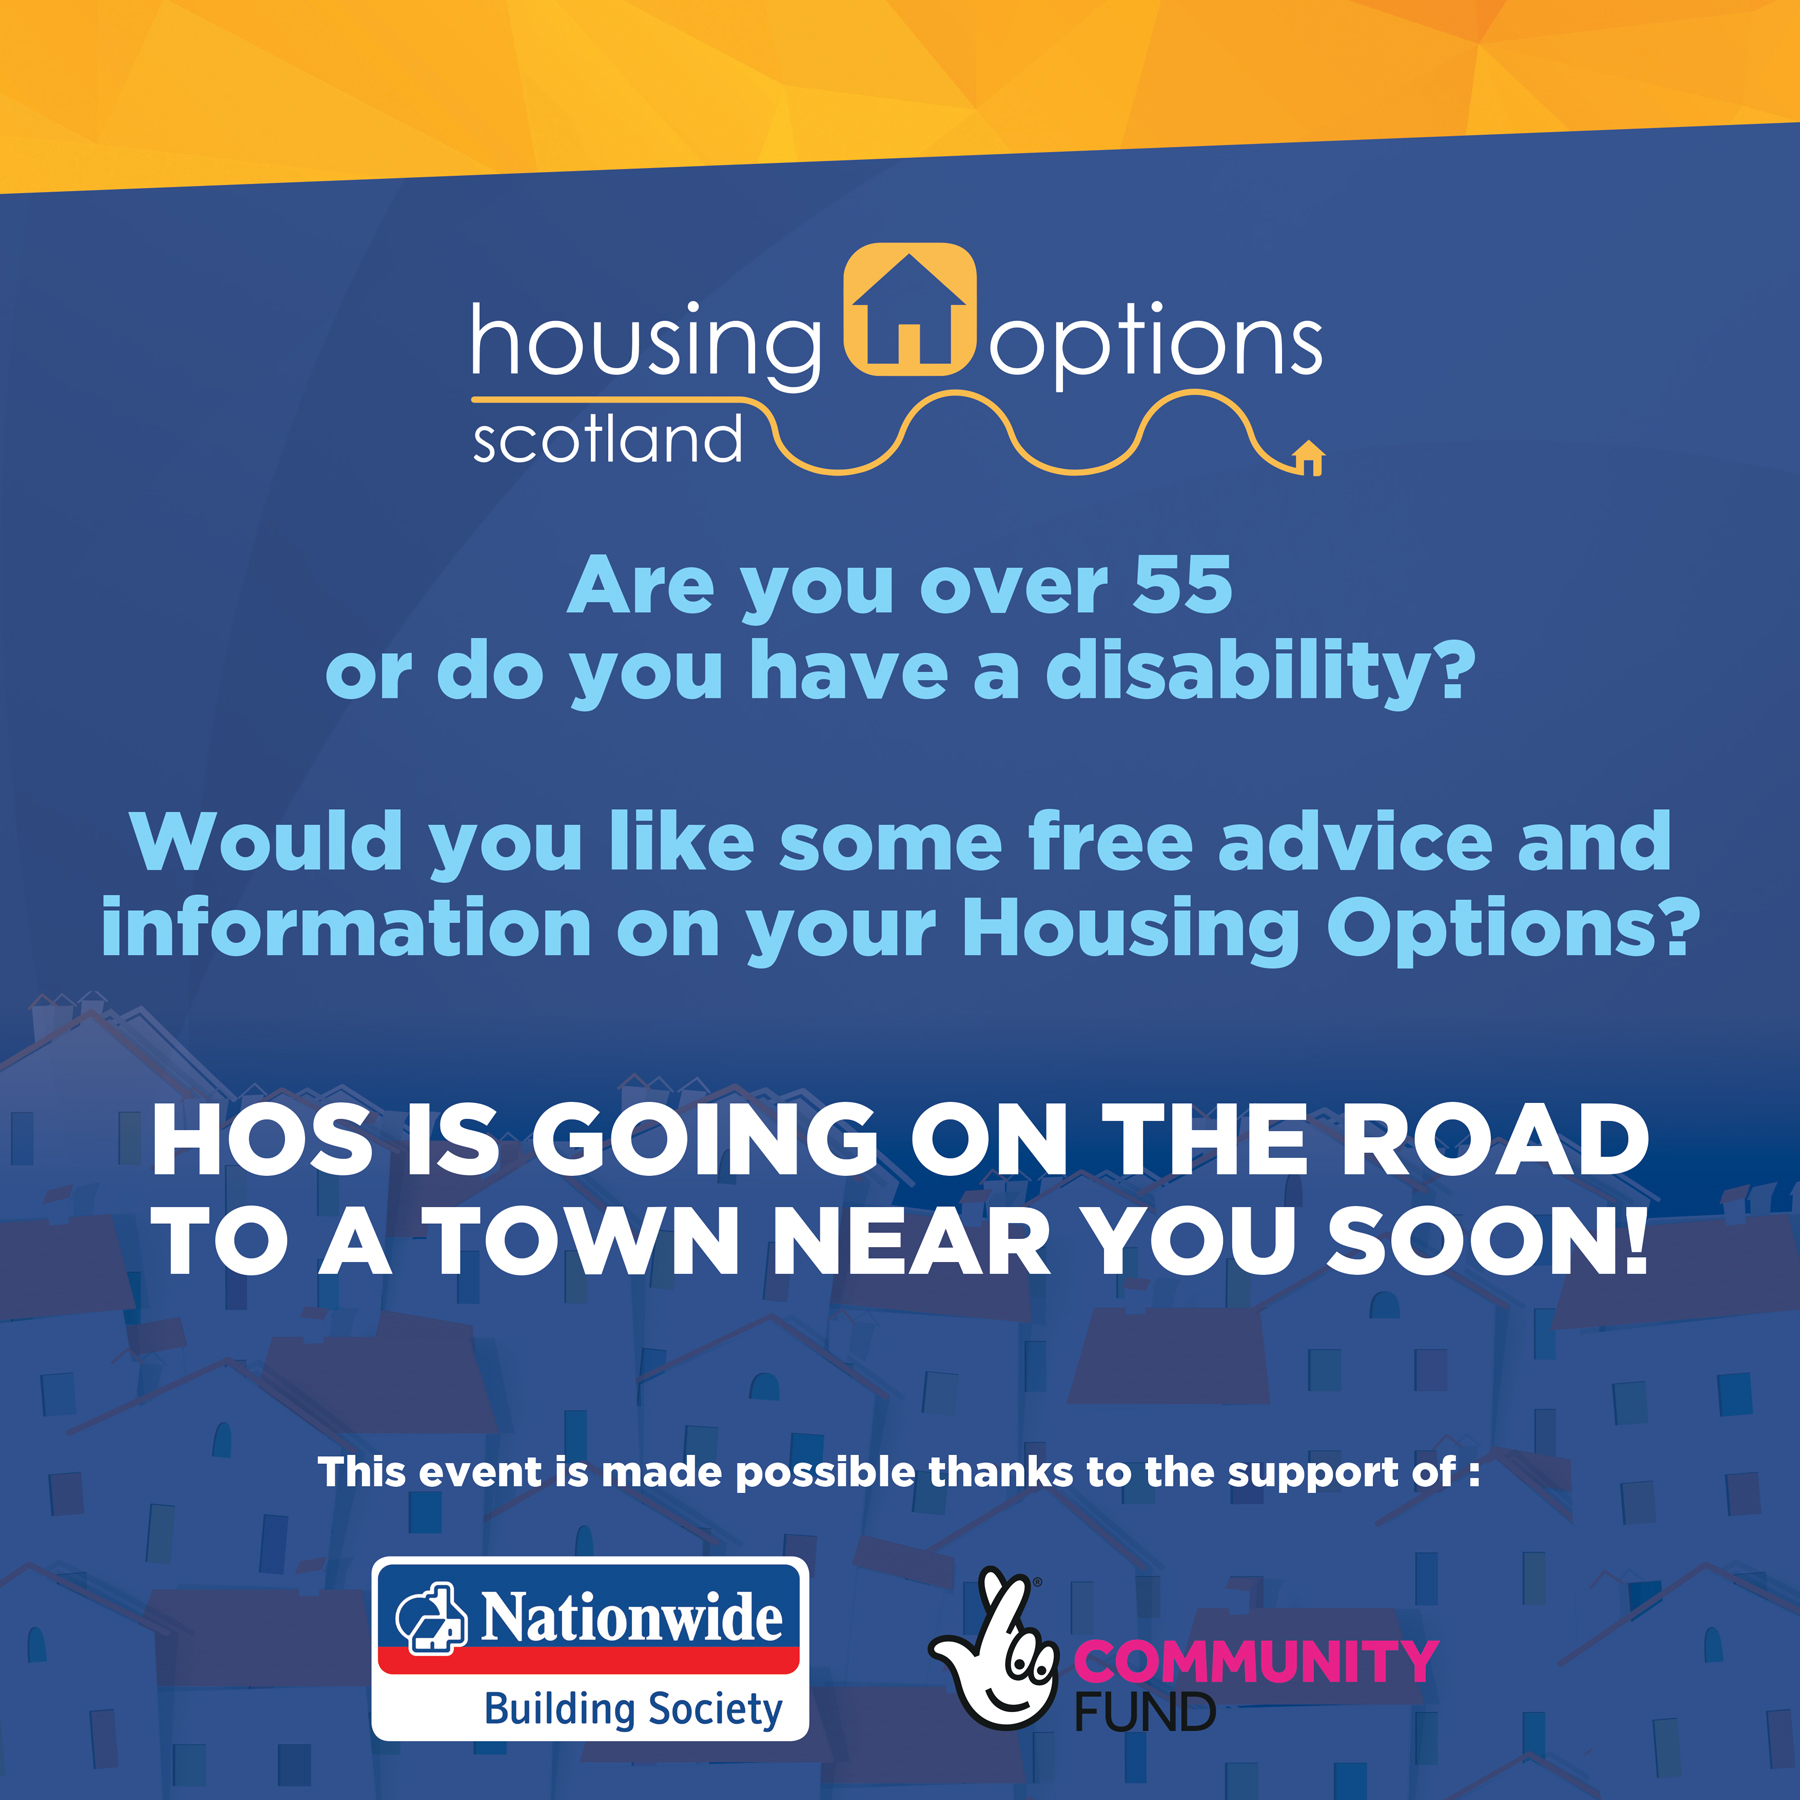 Housing Options Scotland to take advice service on the road